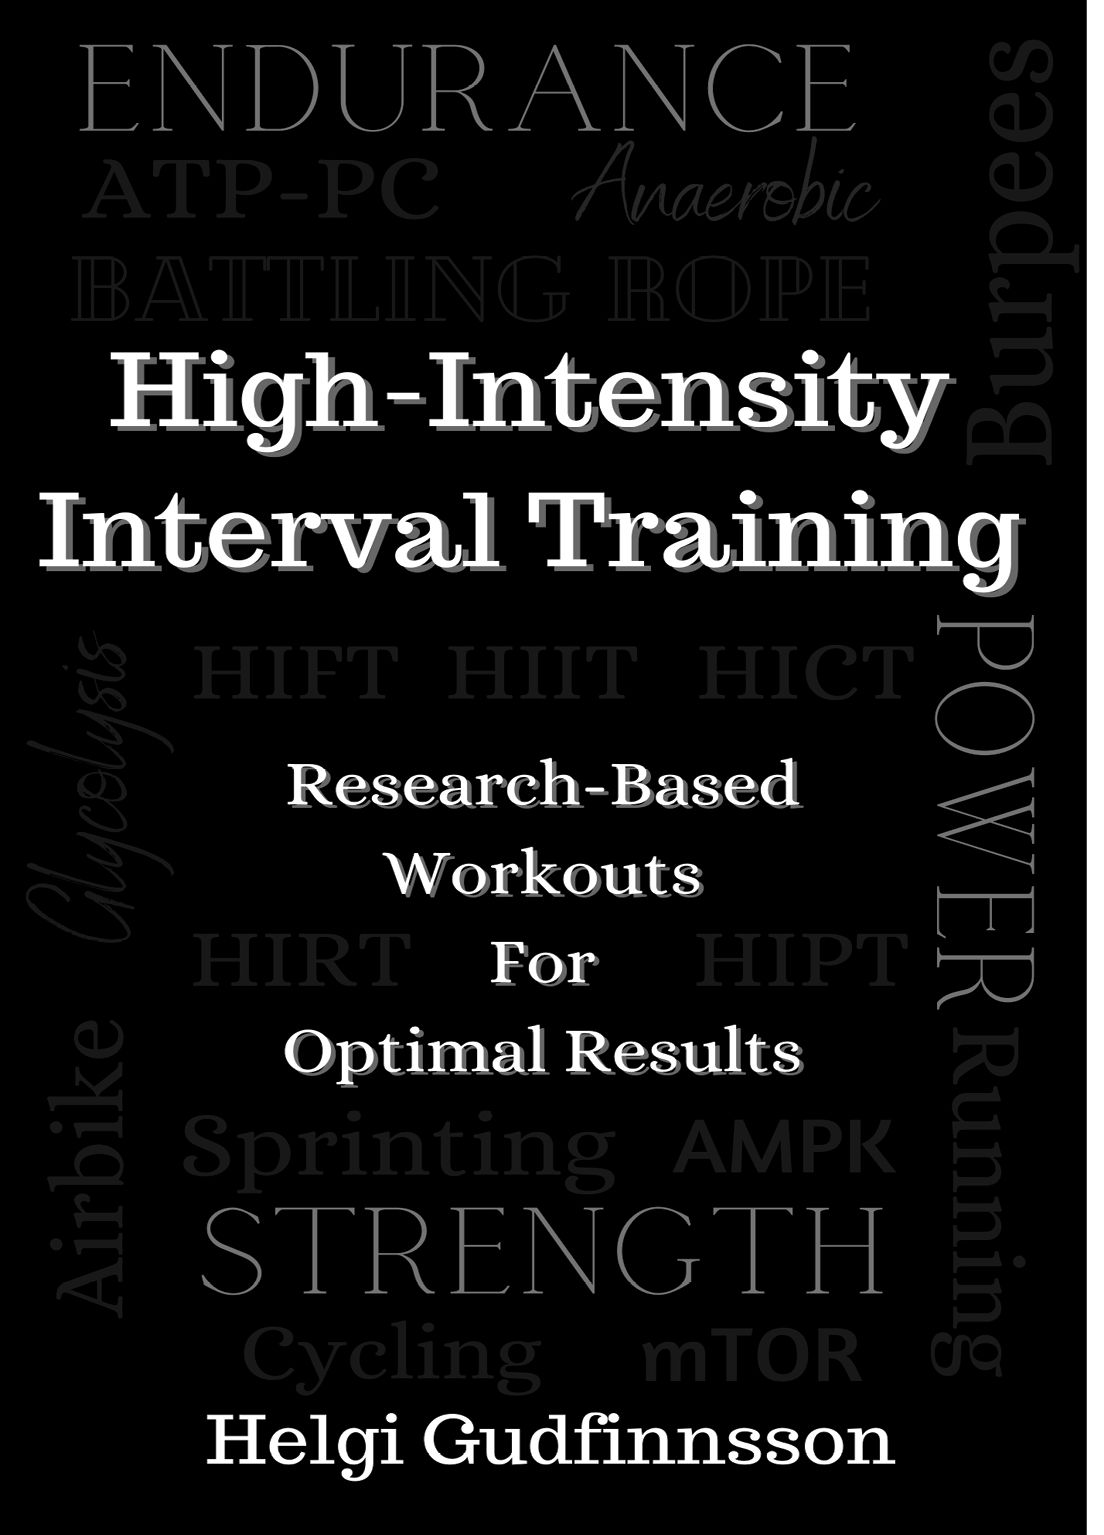 High-Intensity Interval Training Research-Based Workouts for Optimal Results - photo 1